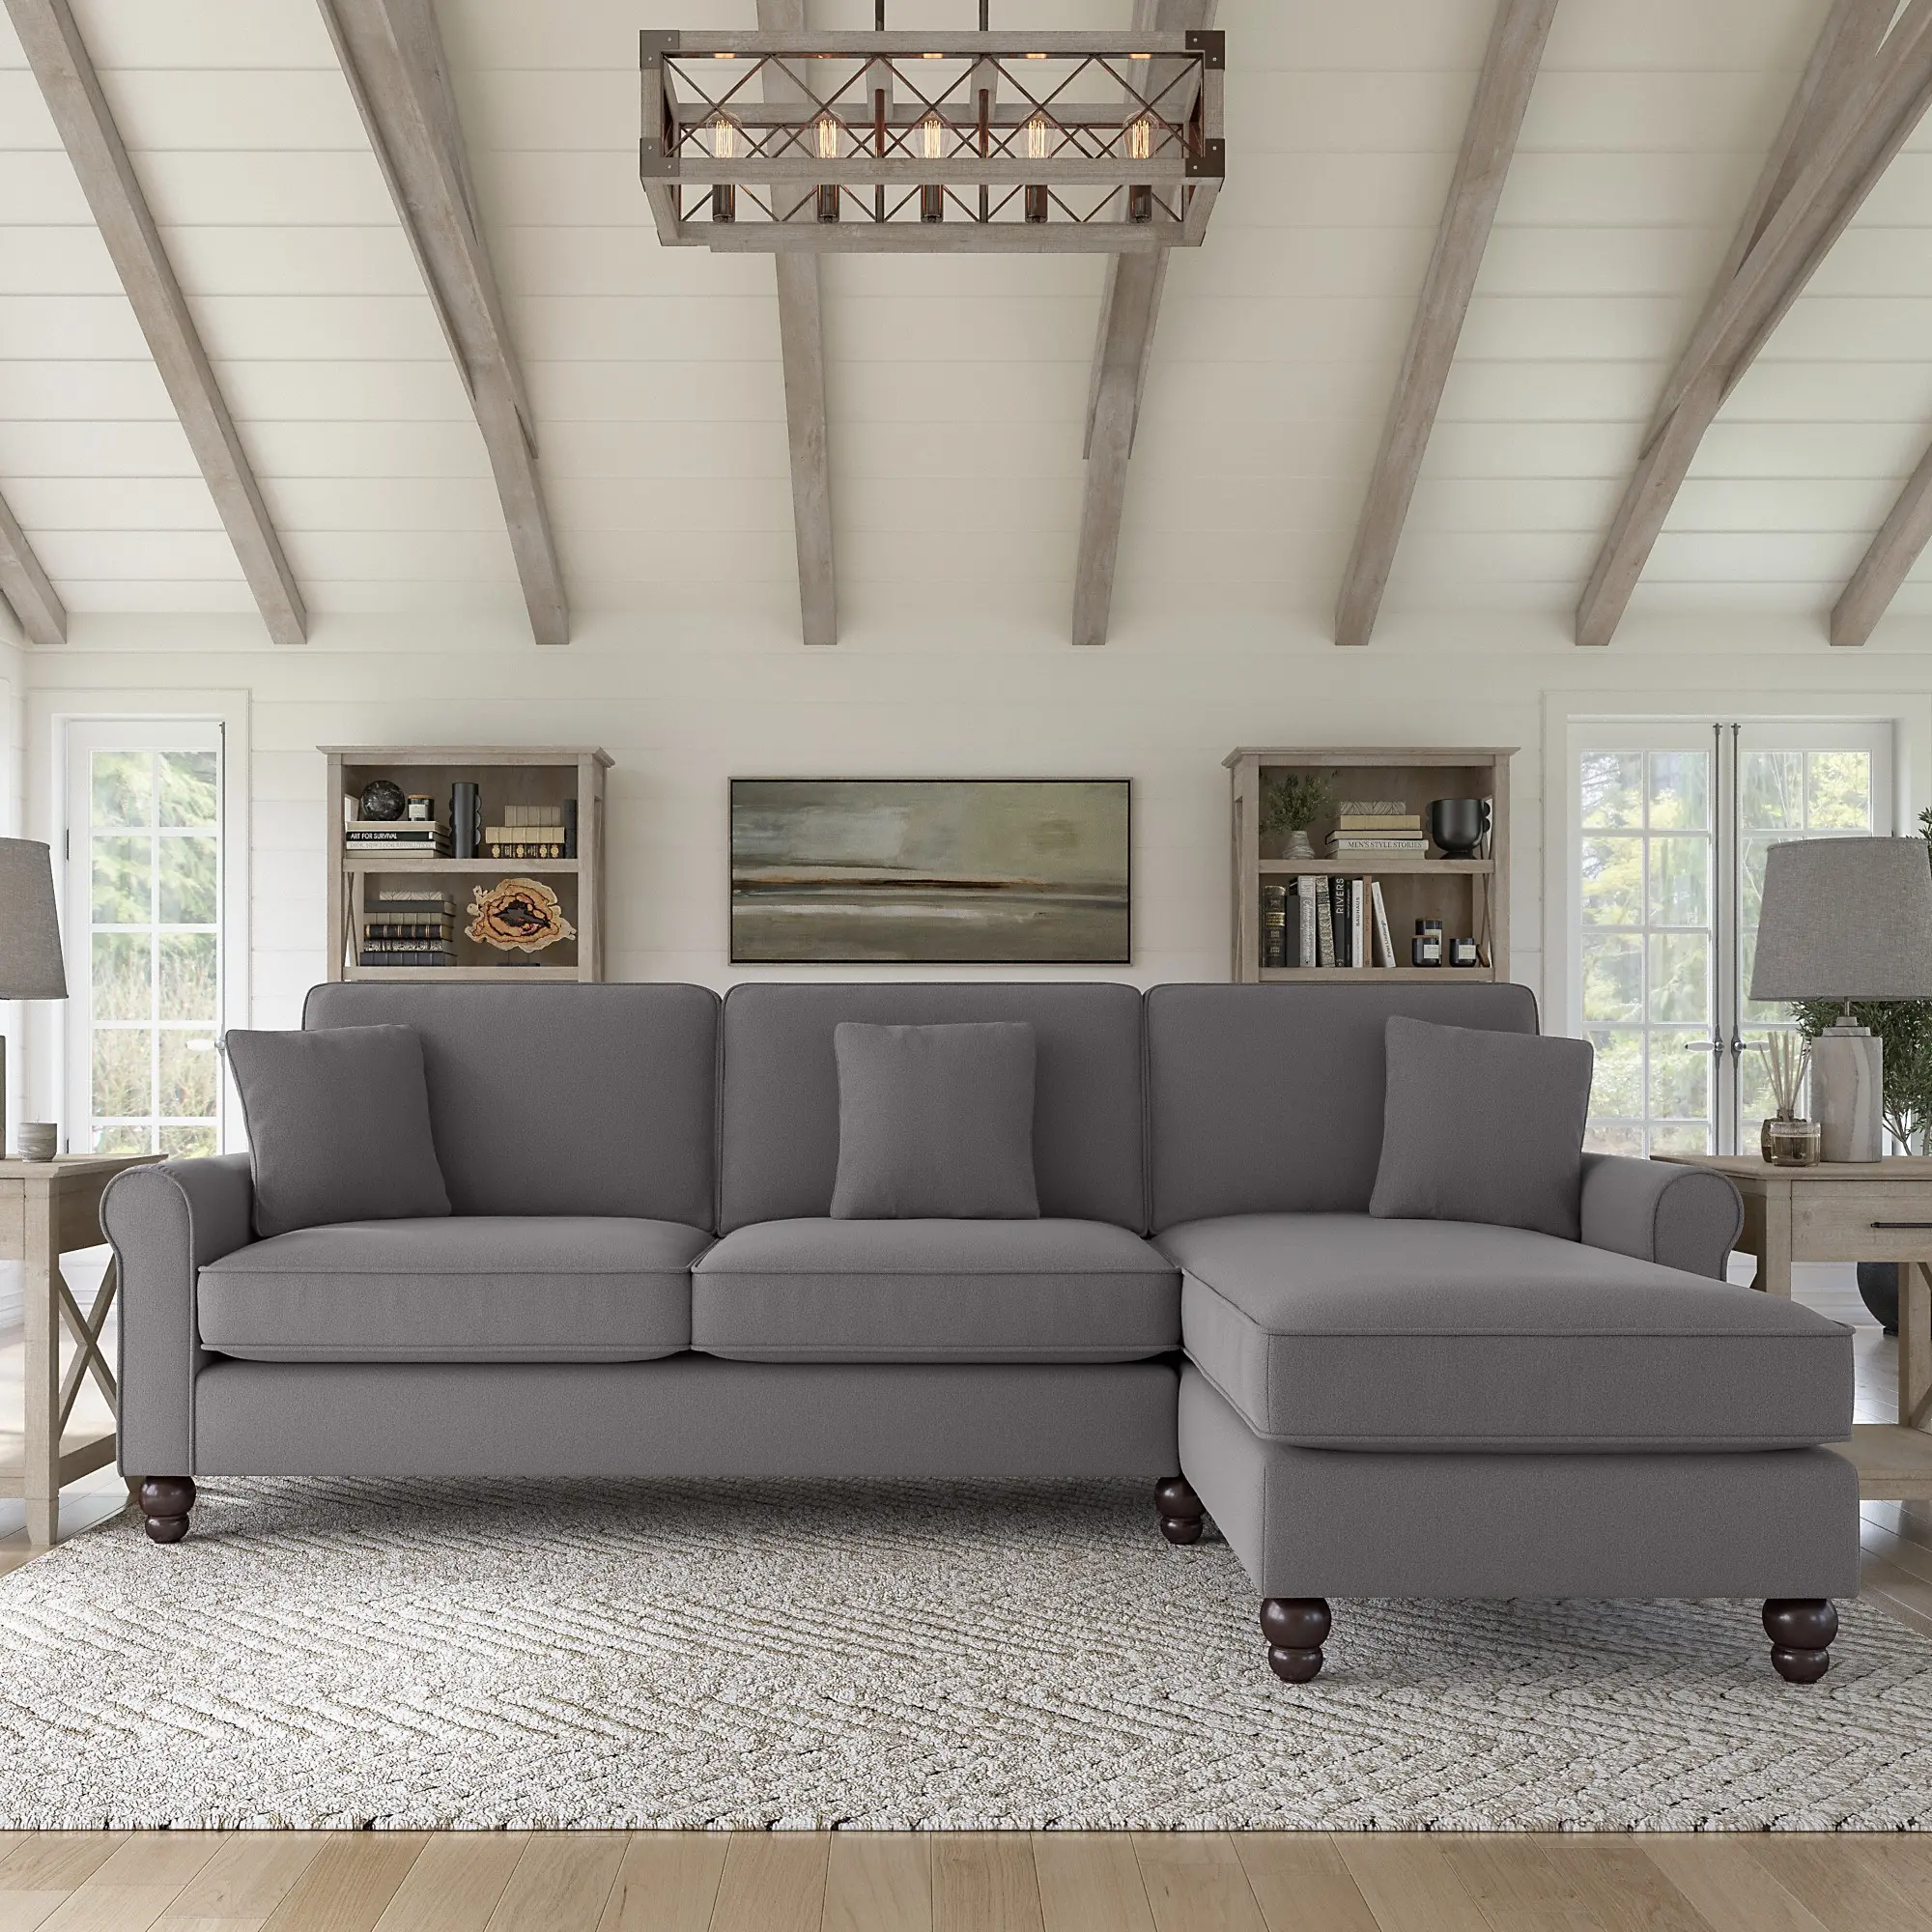 HDY102BFGH-03K Hudson Gray Sectional with Reversible Chaise Loung sku HDY102BFGH-03K